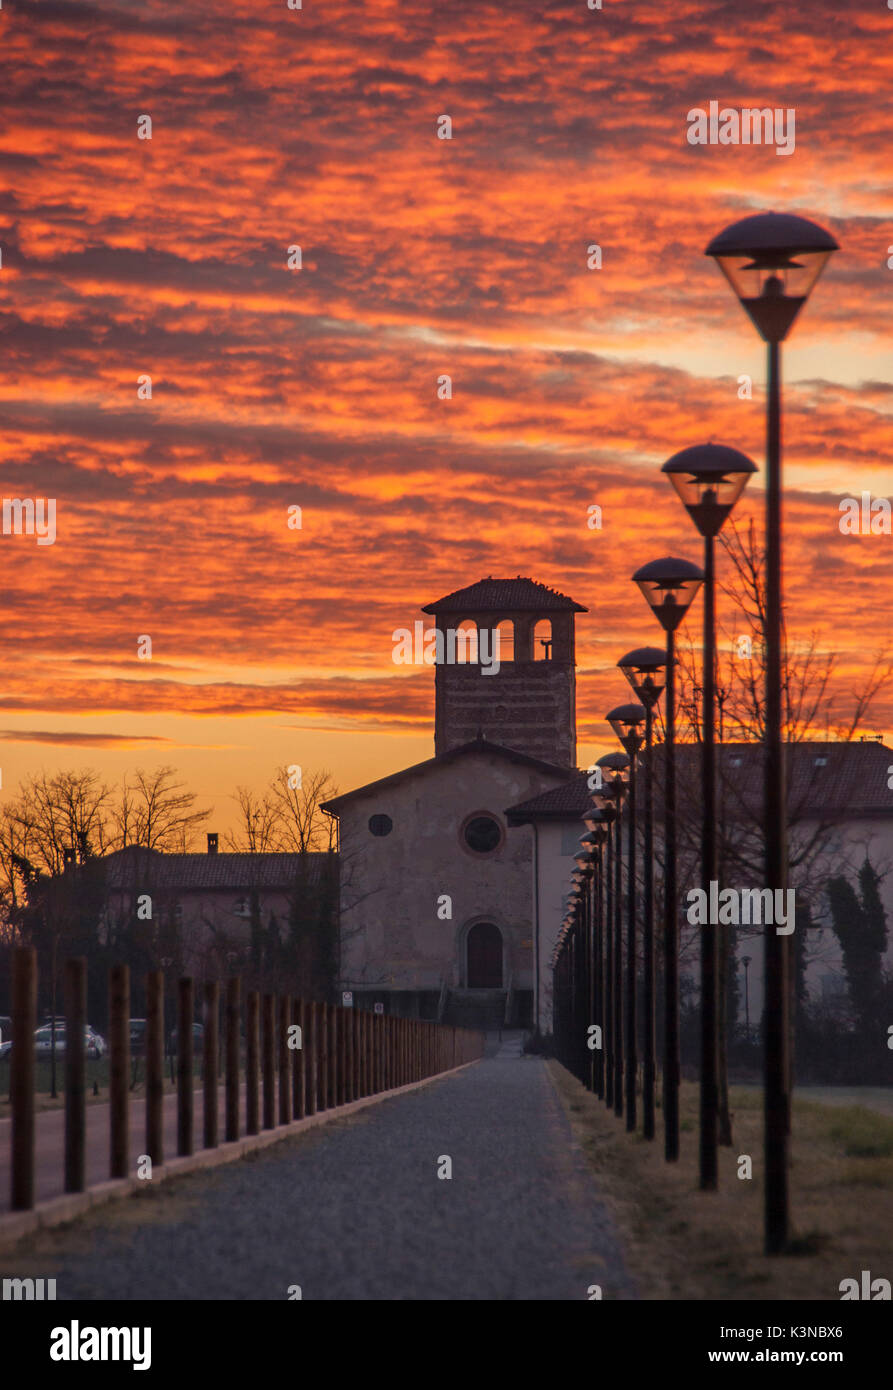 The road, flanked by a row of street lamps, leading to the church of Santa Maria Maddalena in the medieval village of Cascina Camuzzago views at sunrise with a red sky and clouds. Bellusco, Monza and Brianza, Lombardy, Italy Stock Photo